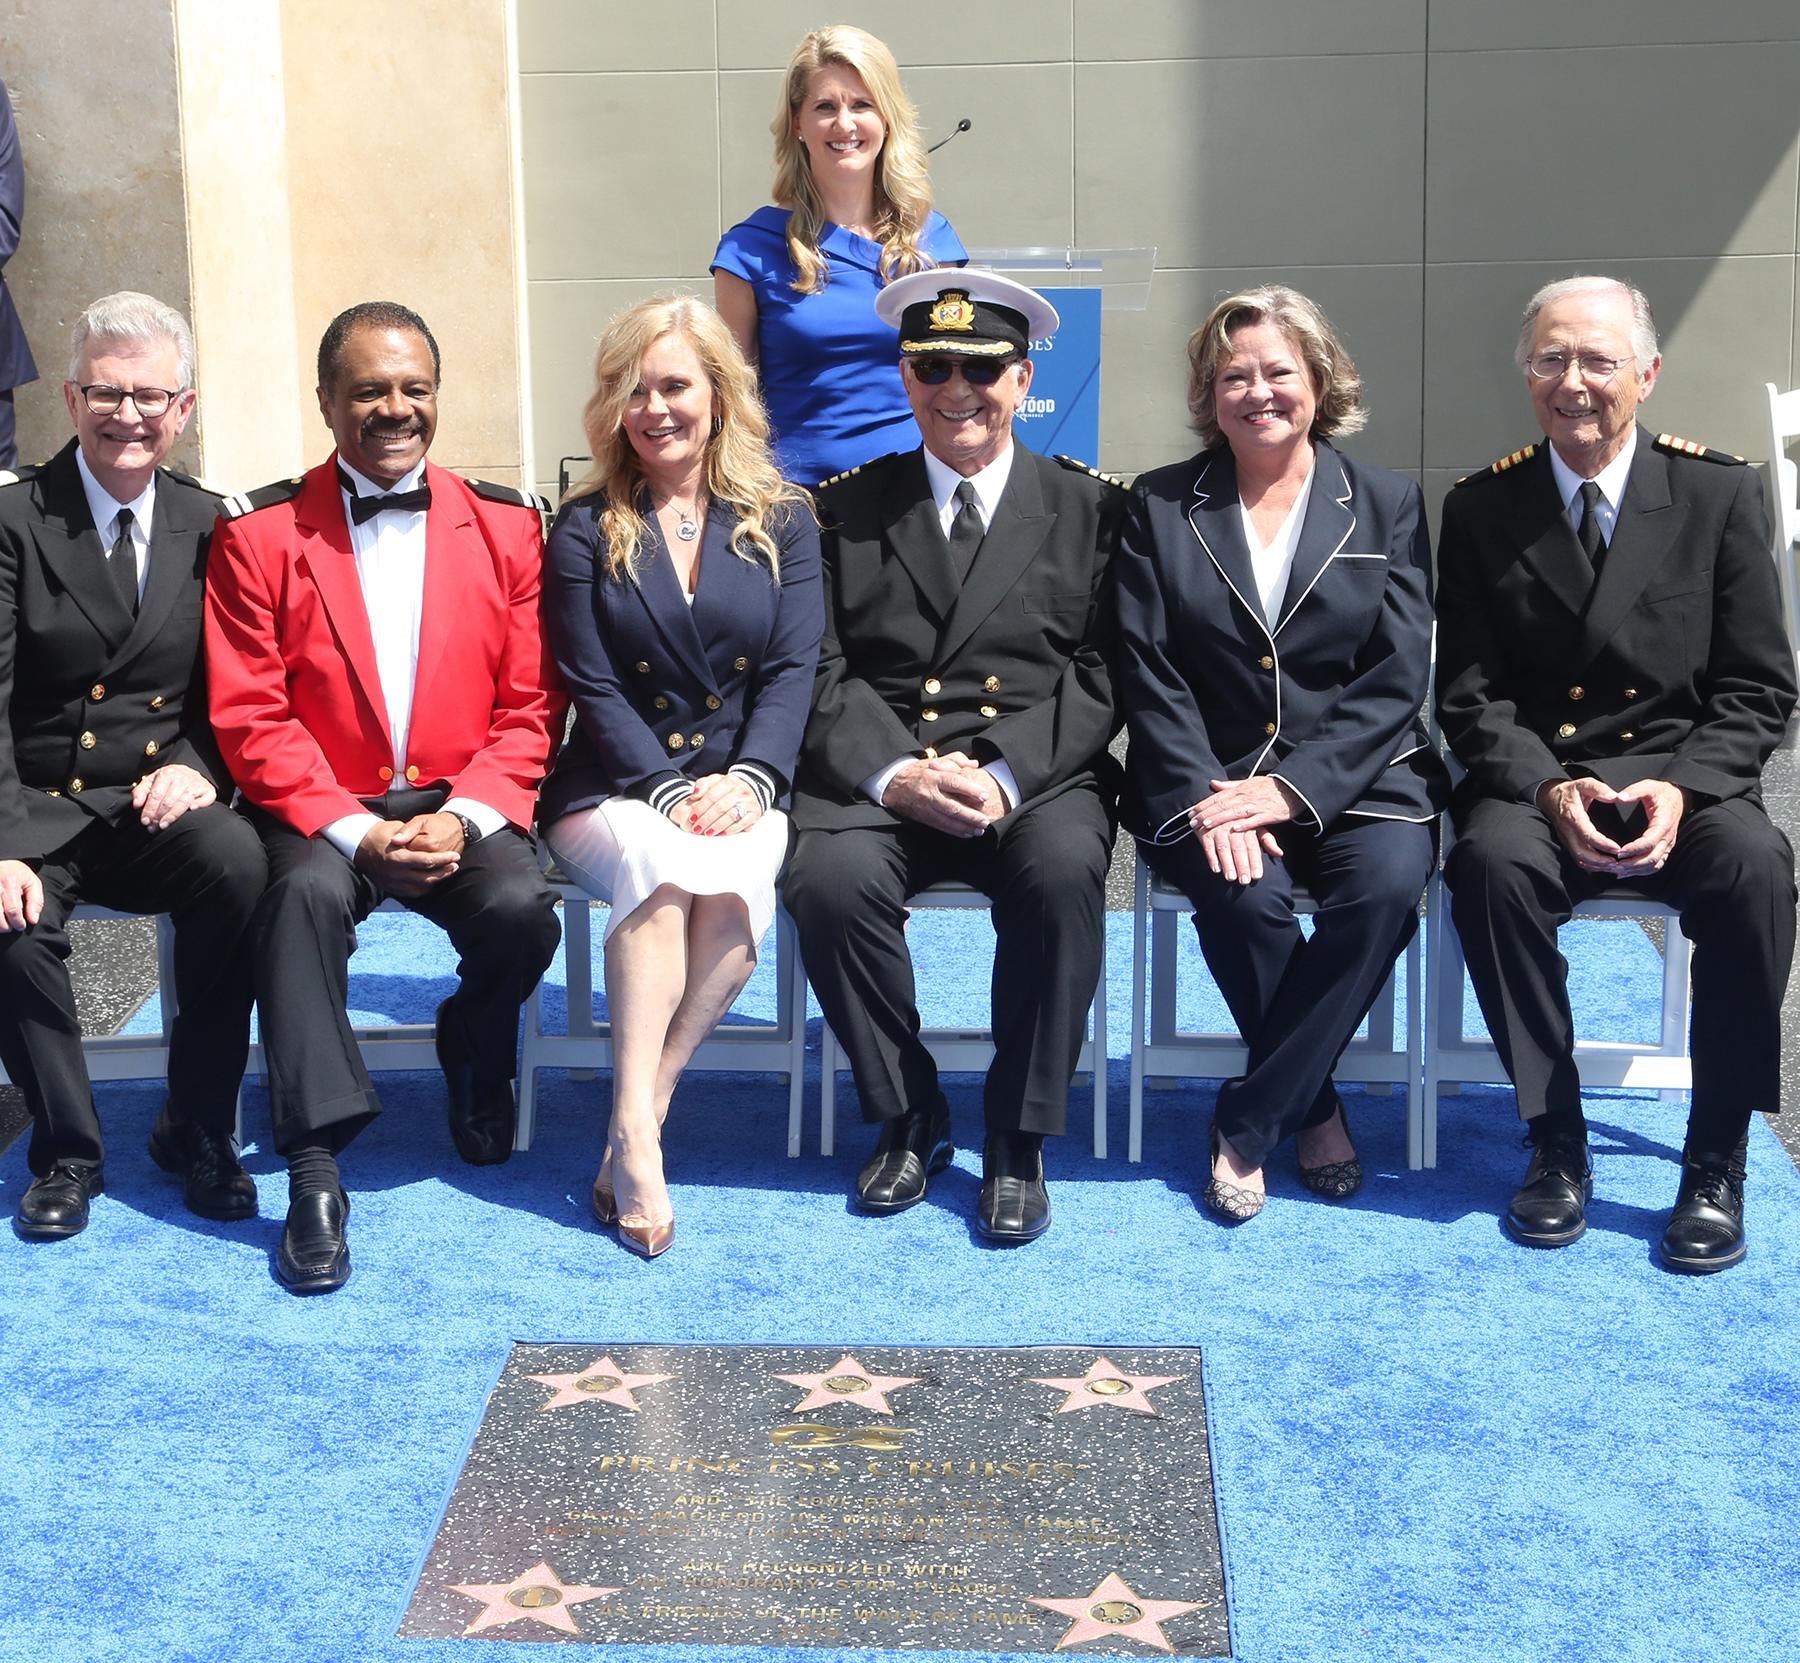 The cast of The Love Boat and Princess Cruises receive a star on the Hollywood Walk of Fame